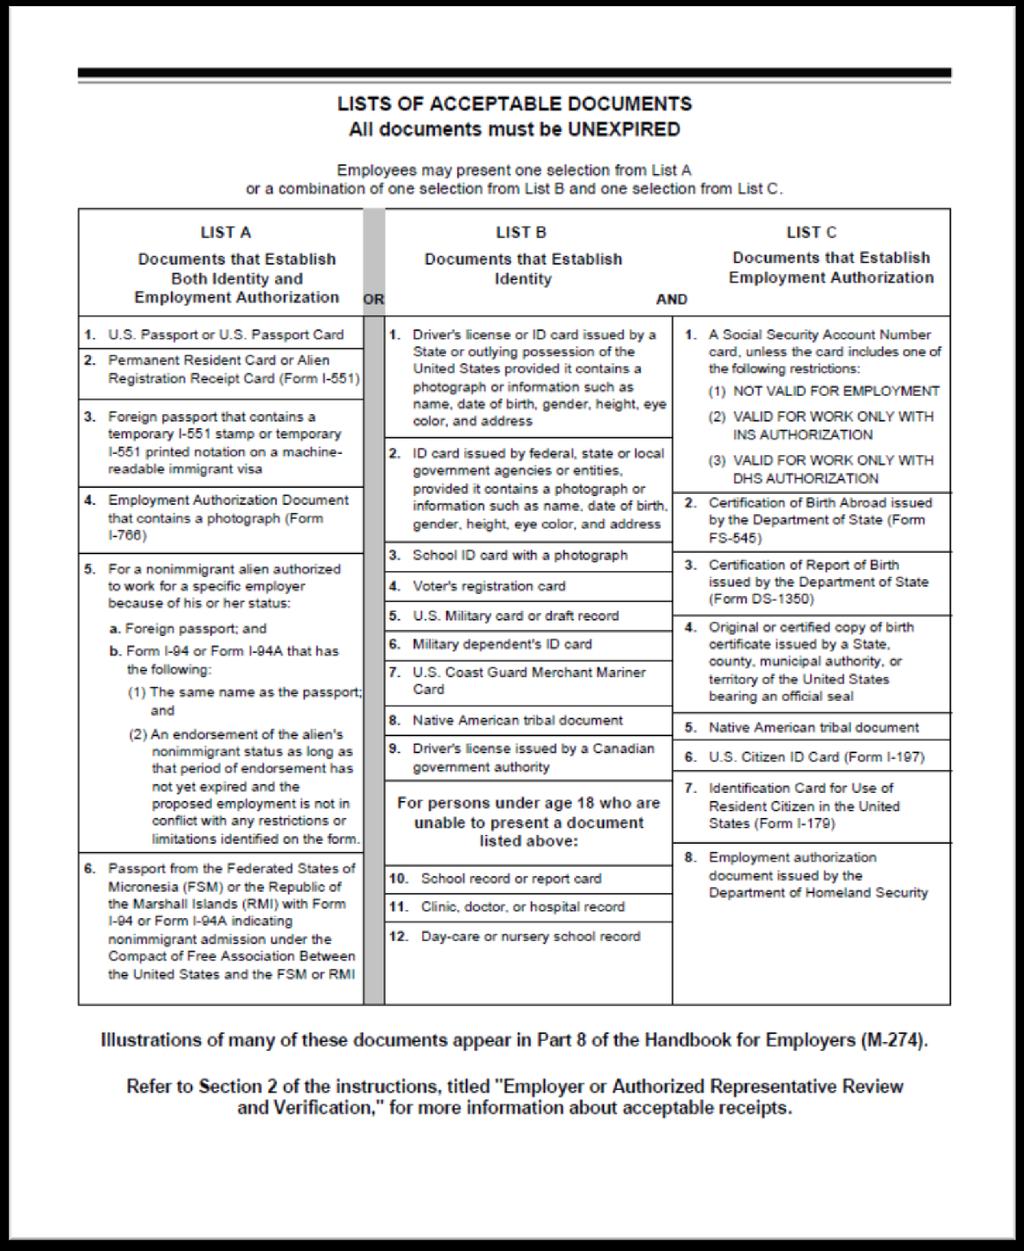 LIST OF ACCEPTABLE DOCUMENTS o Use MOST CURRENT Form I-9 VERSION, 03/08/13 o You must make the Lists of Acceptable Documents available to your EMPLOYEE